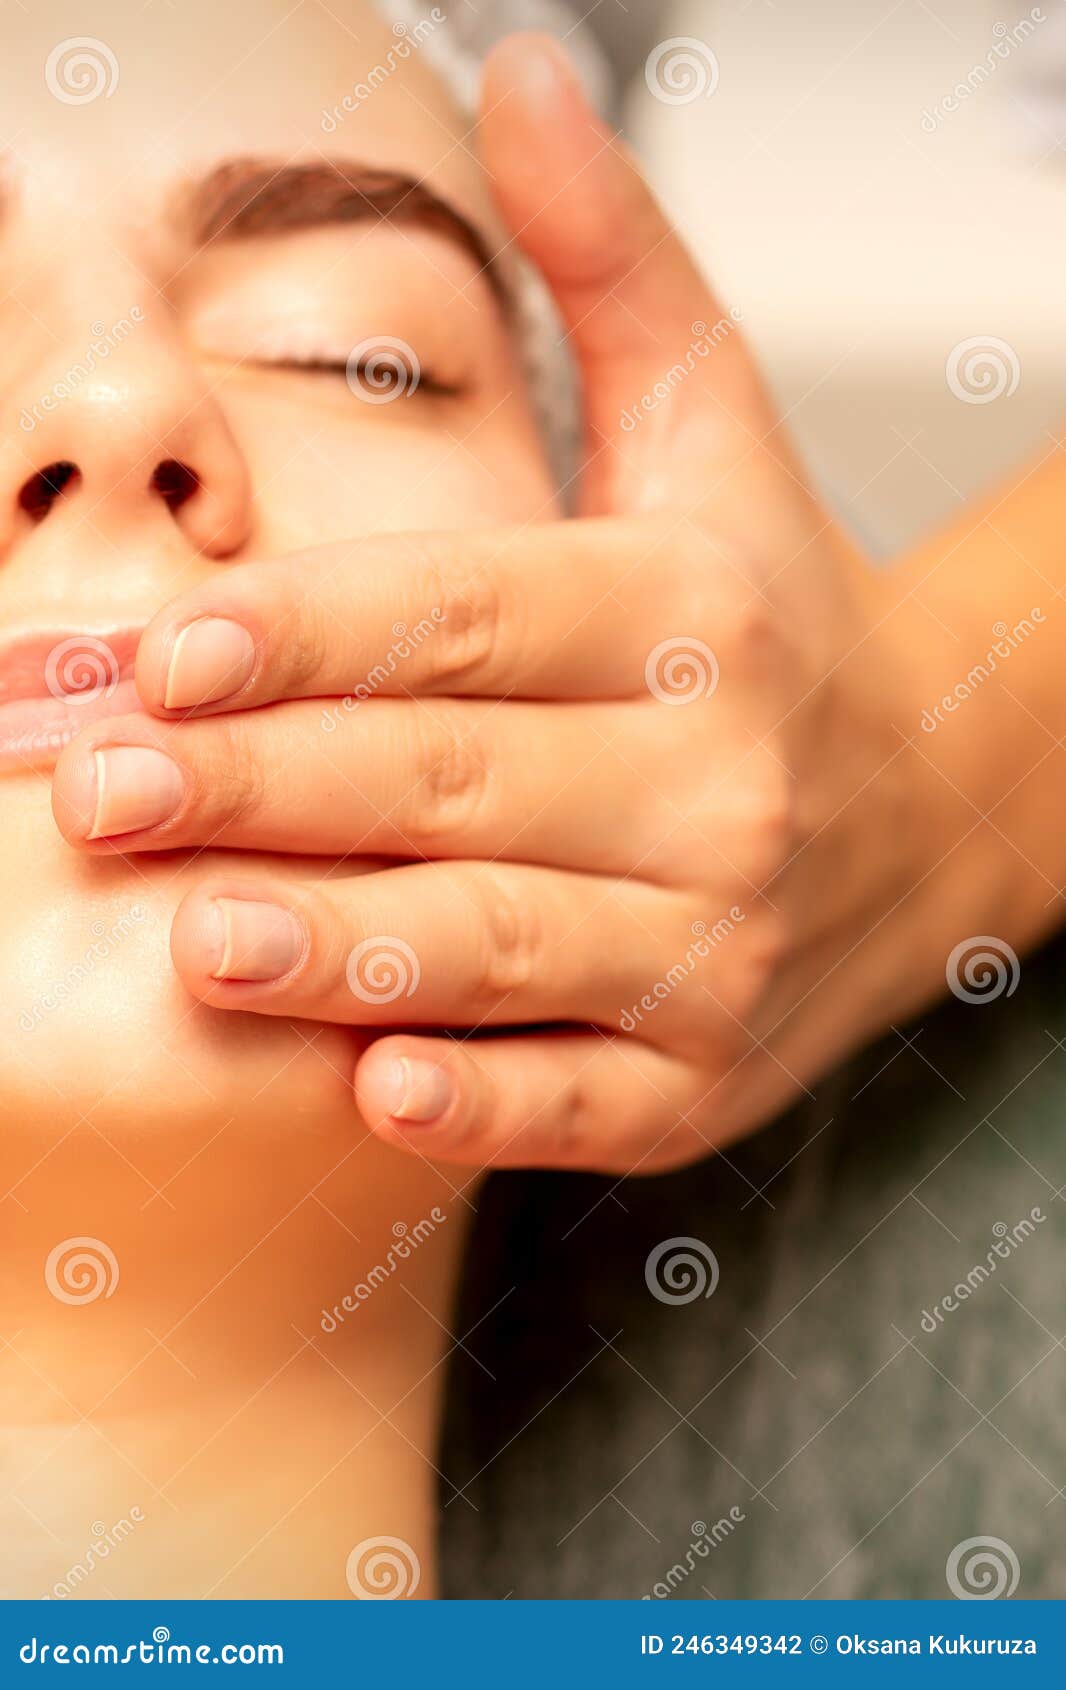 Beautiful Young Caucasian Woman With Closed Eyes Receiving A Facial Massage In A Beauty Salon